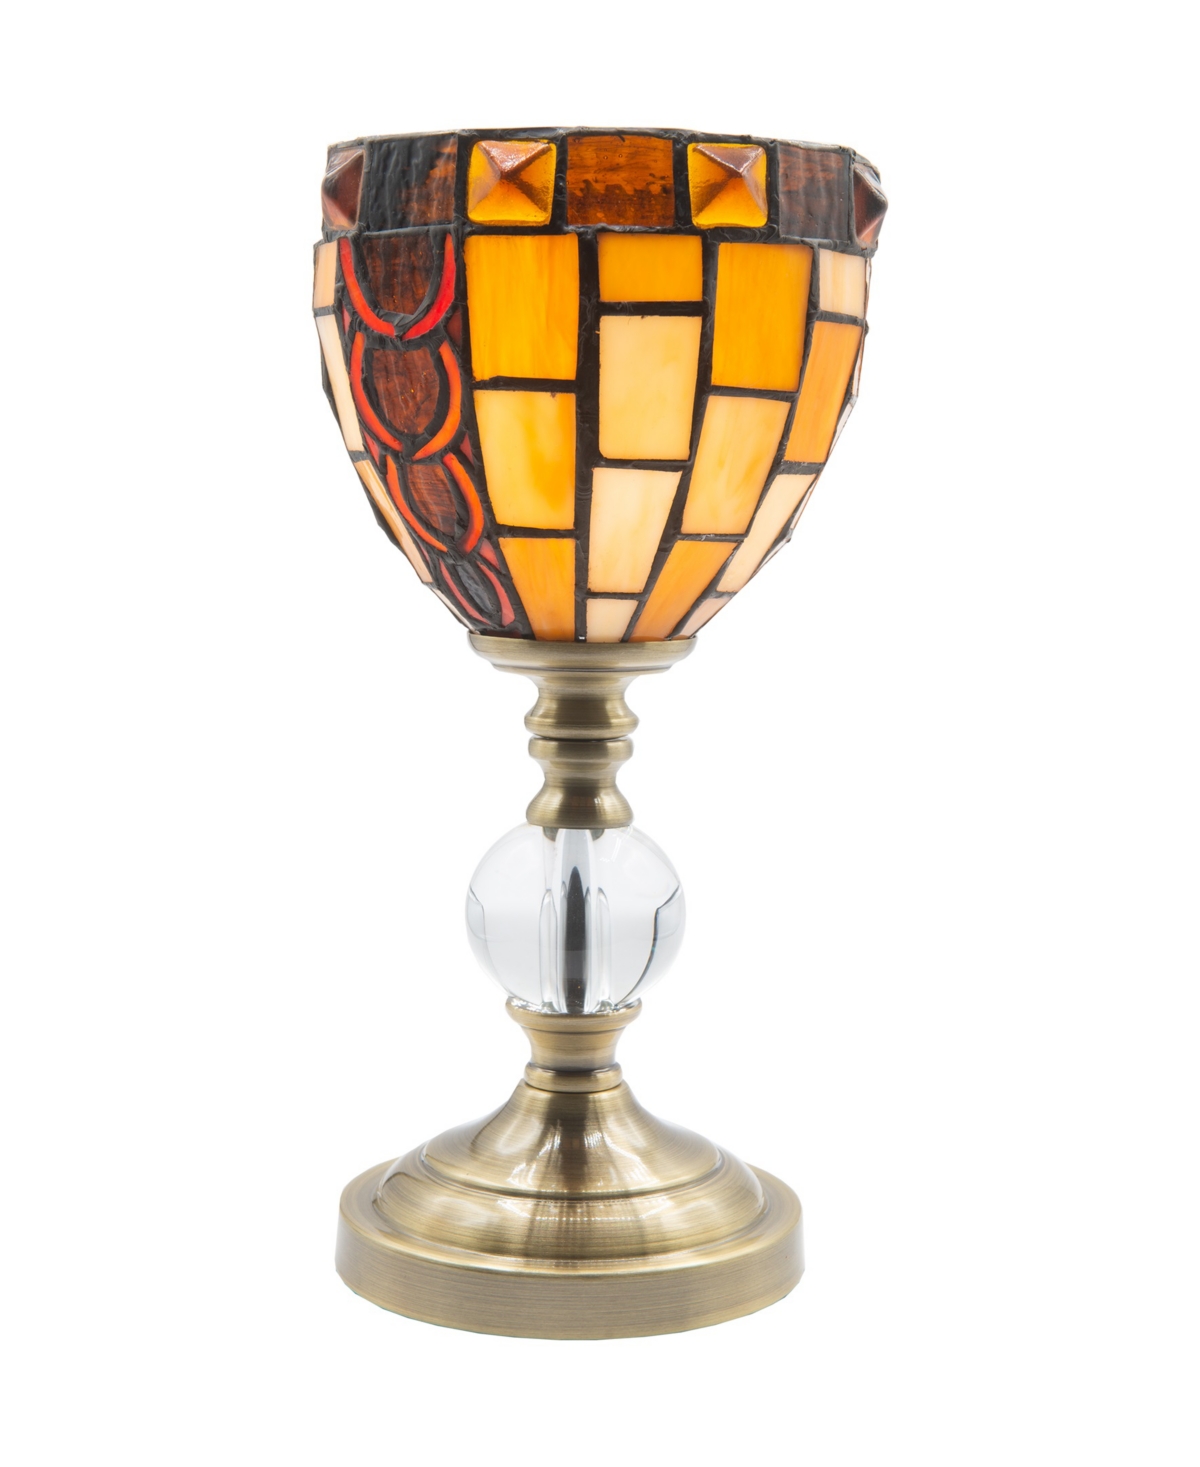 Shop Dale Tiffany 13" Tall Vienne Tiffany Handmade Genuine Stained Glass Shade Accent Lamp In Multi-color